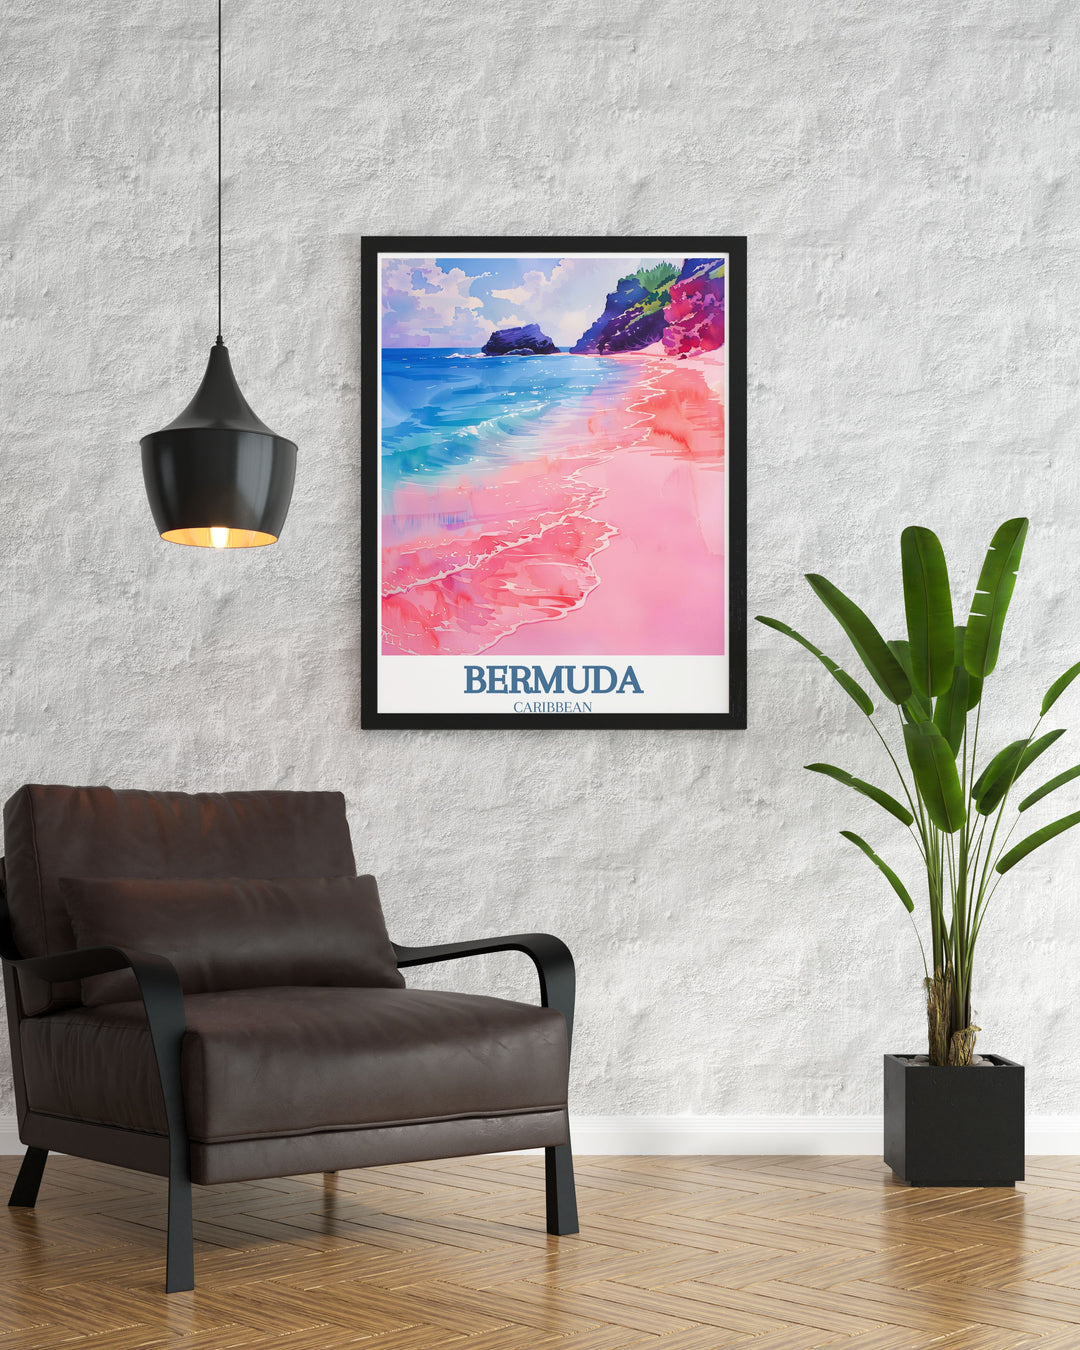 Unique artwork of Bermuda featuring Horseshoe Bay Beach and Warwick Long Bay, perfect for personalized gifts or home decor. This print captures the essence of Bermudas scenic landscapes and tropical allure.